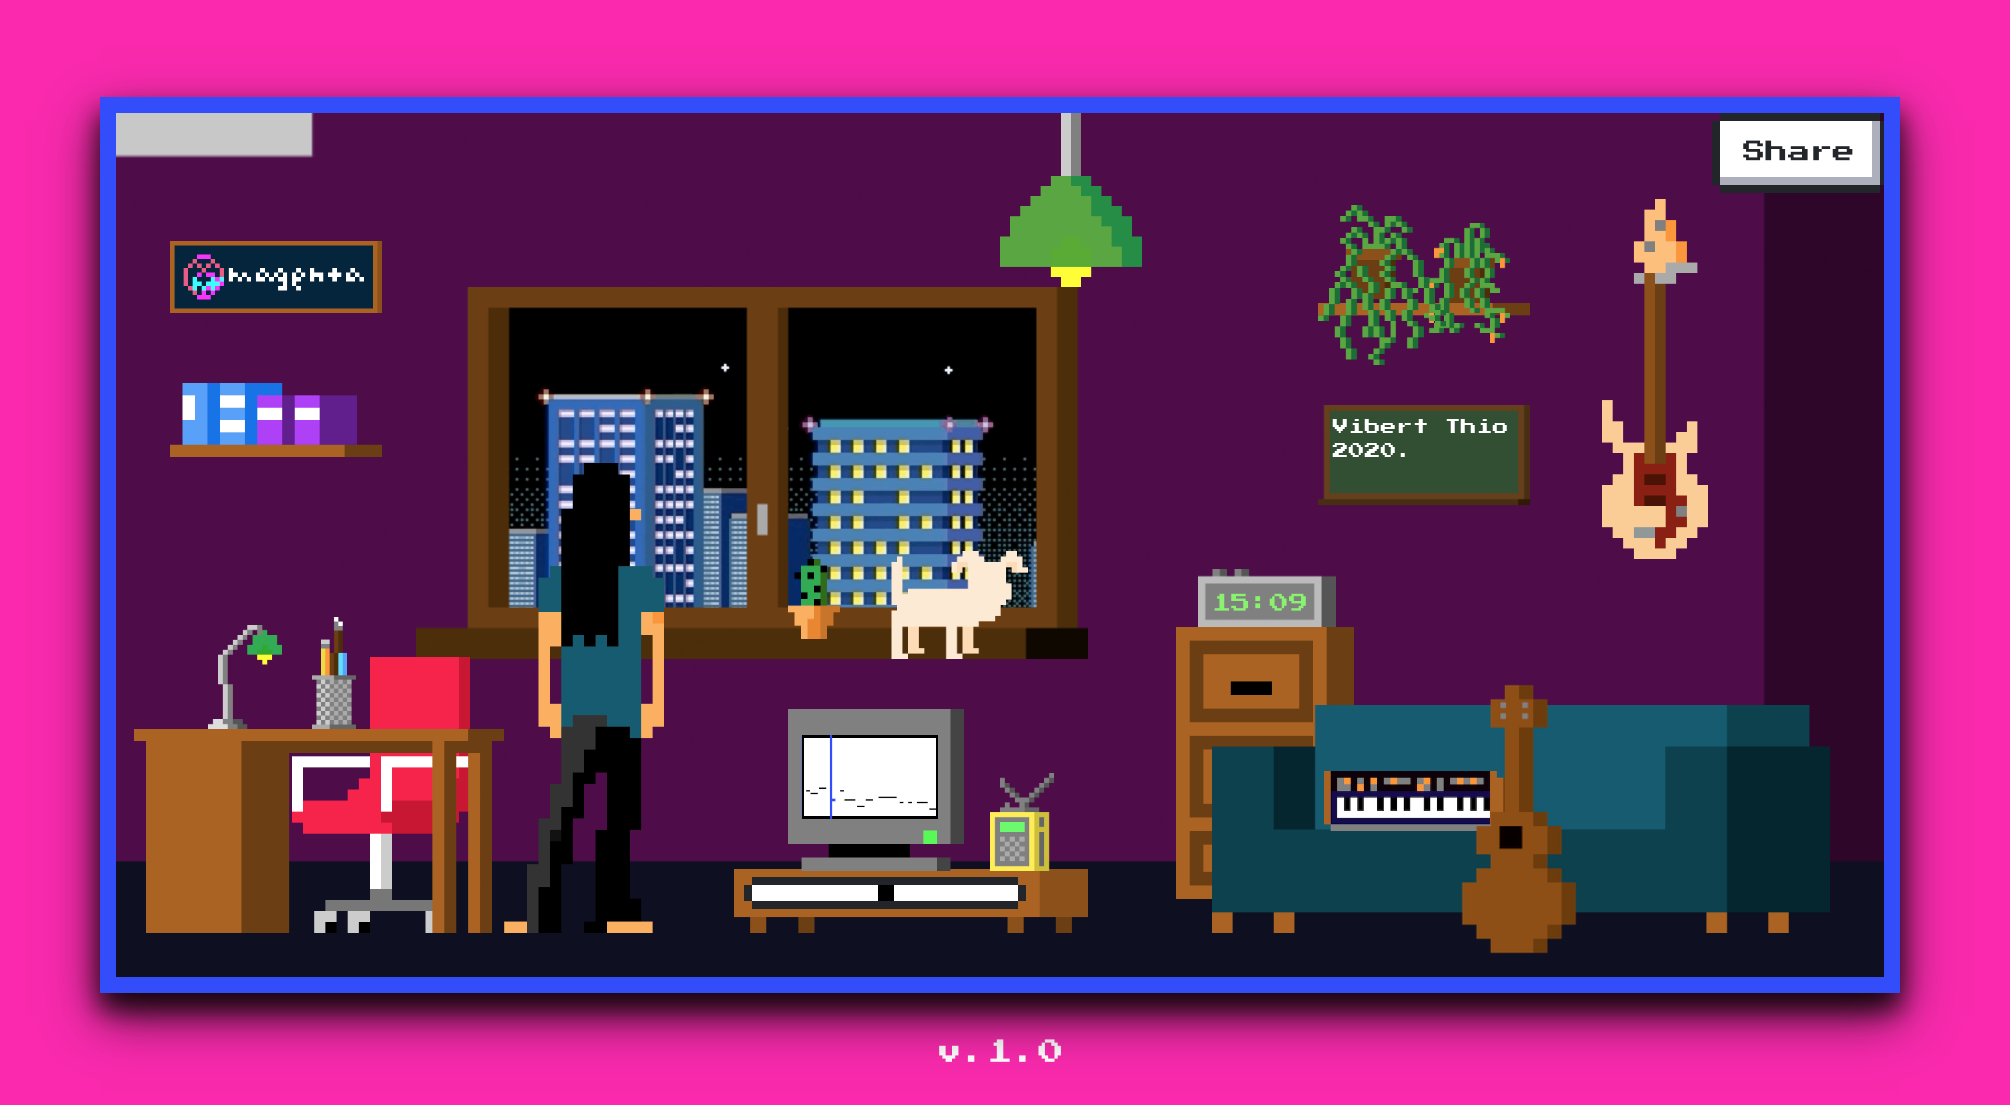 Google Magenta’s Lo-Fi Player is your customisable hip-hop beats producer